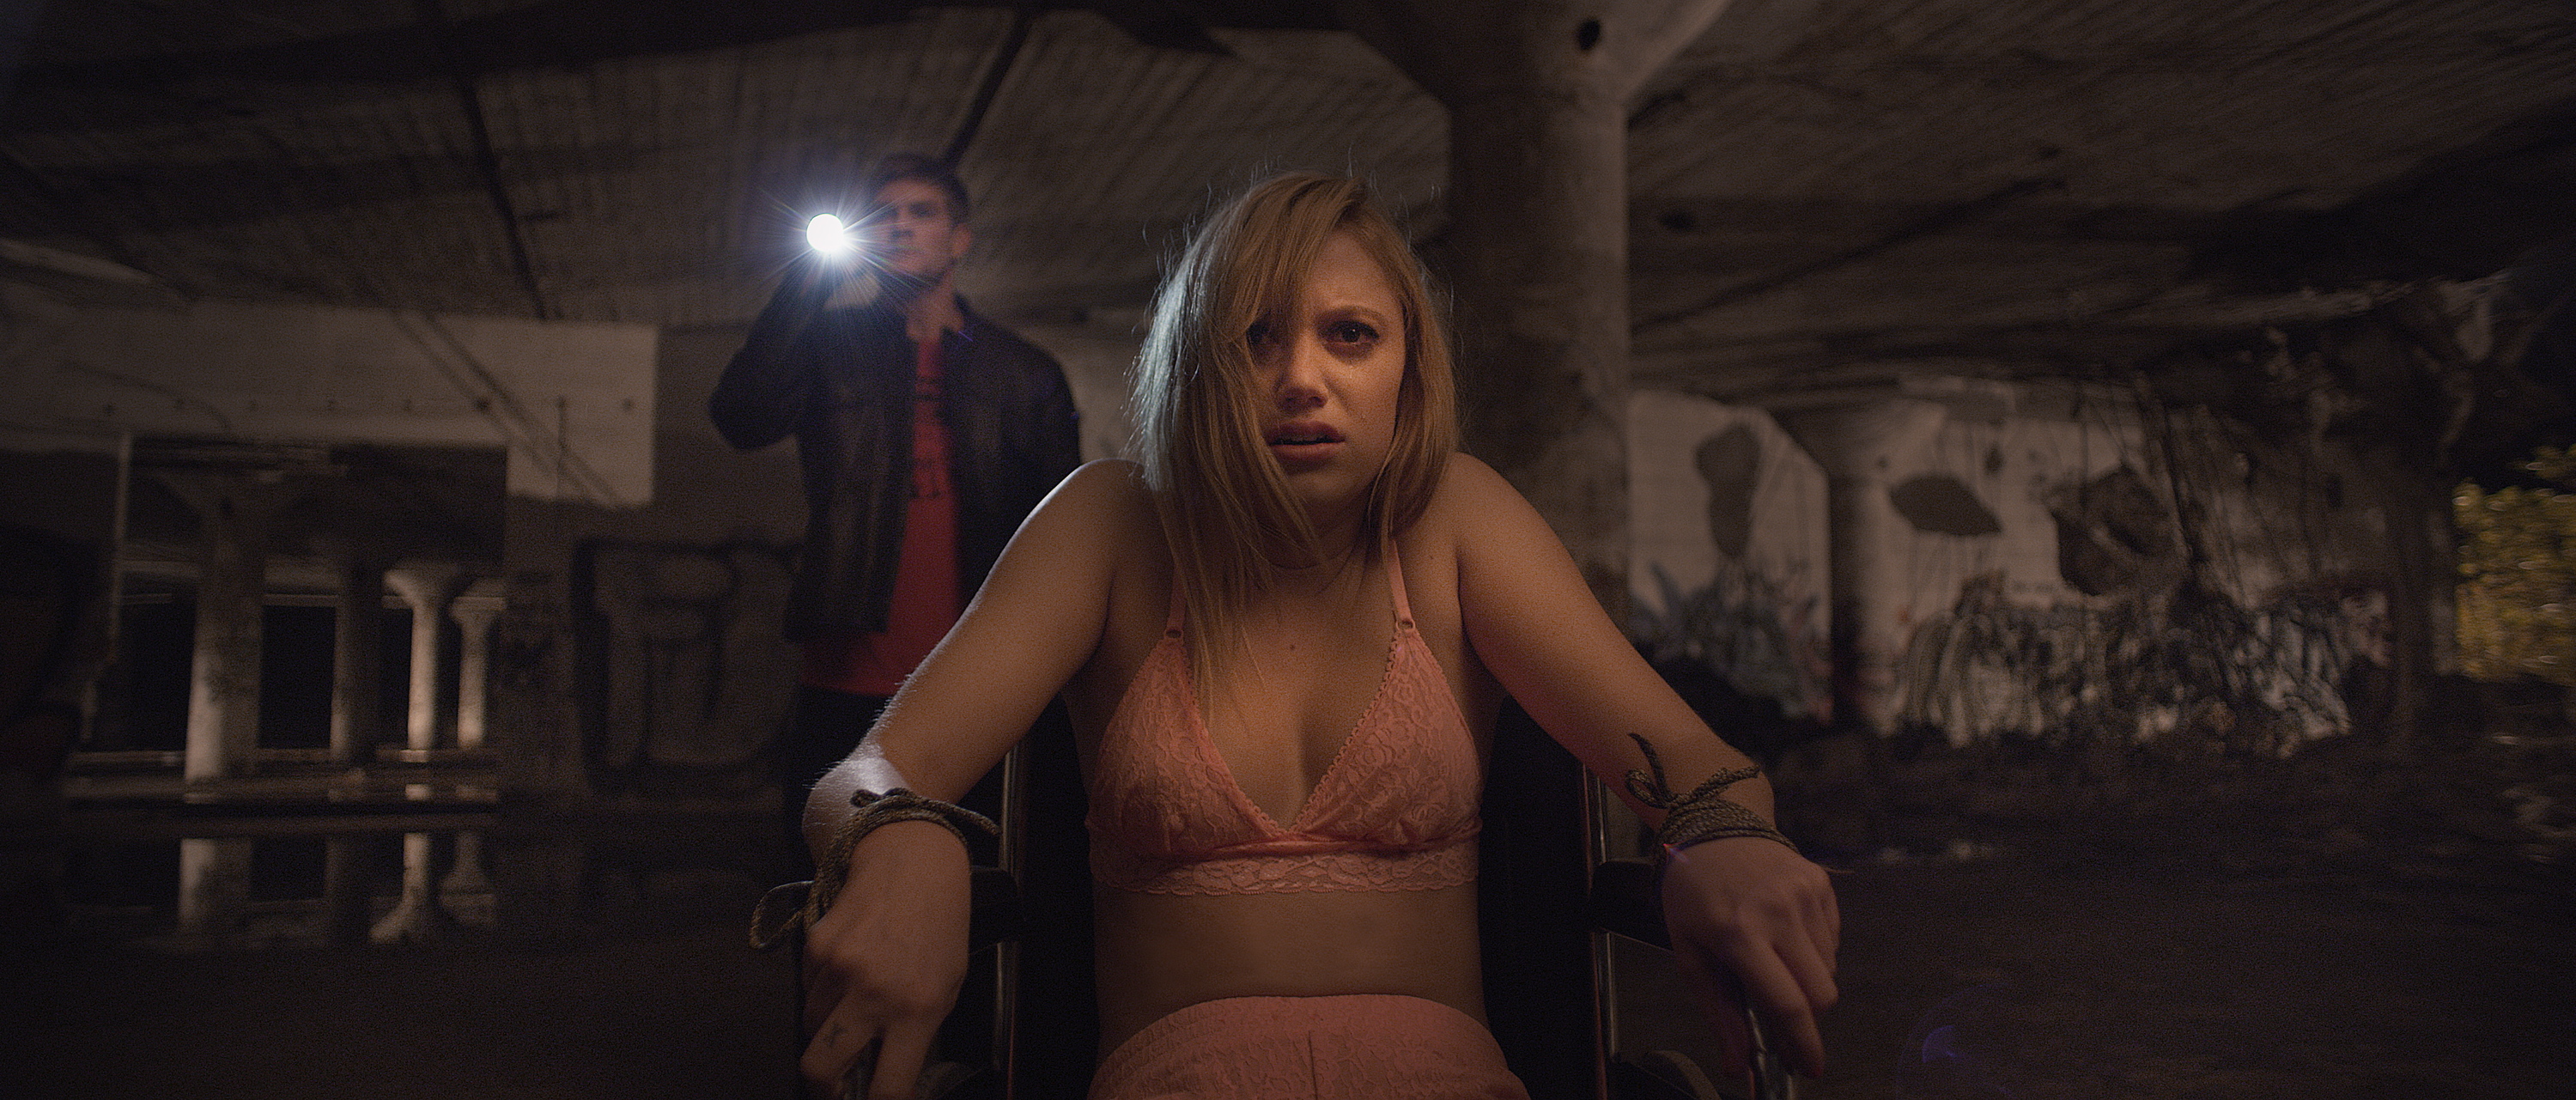 Horrorprone Com - It Follows 2015, directed by David Robert Mitchell | Film review